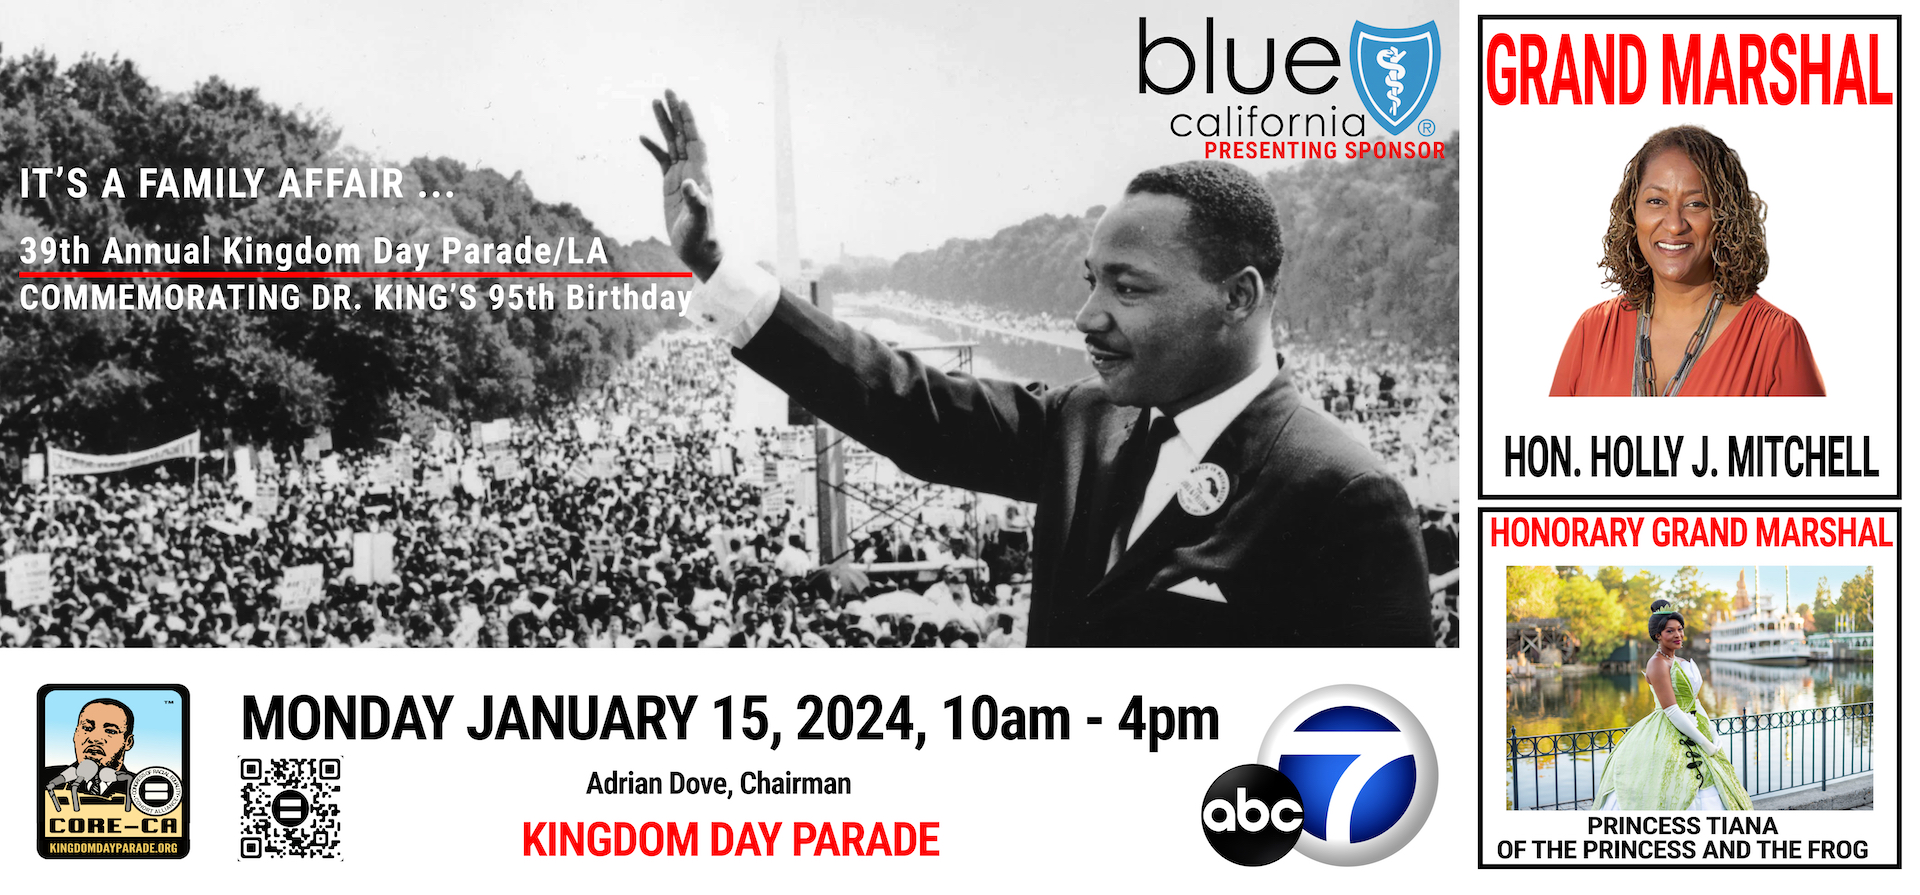 Grand Marshal Named for the 39th Annual Kingdom Day Parade Celebration in Los Angeles